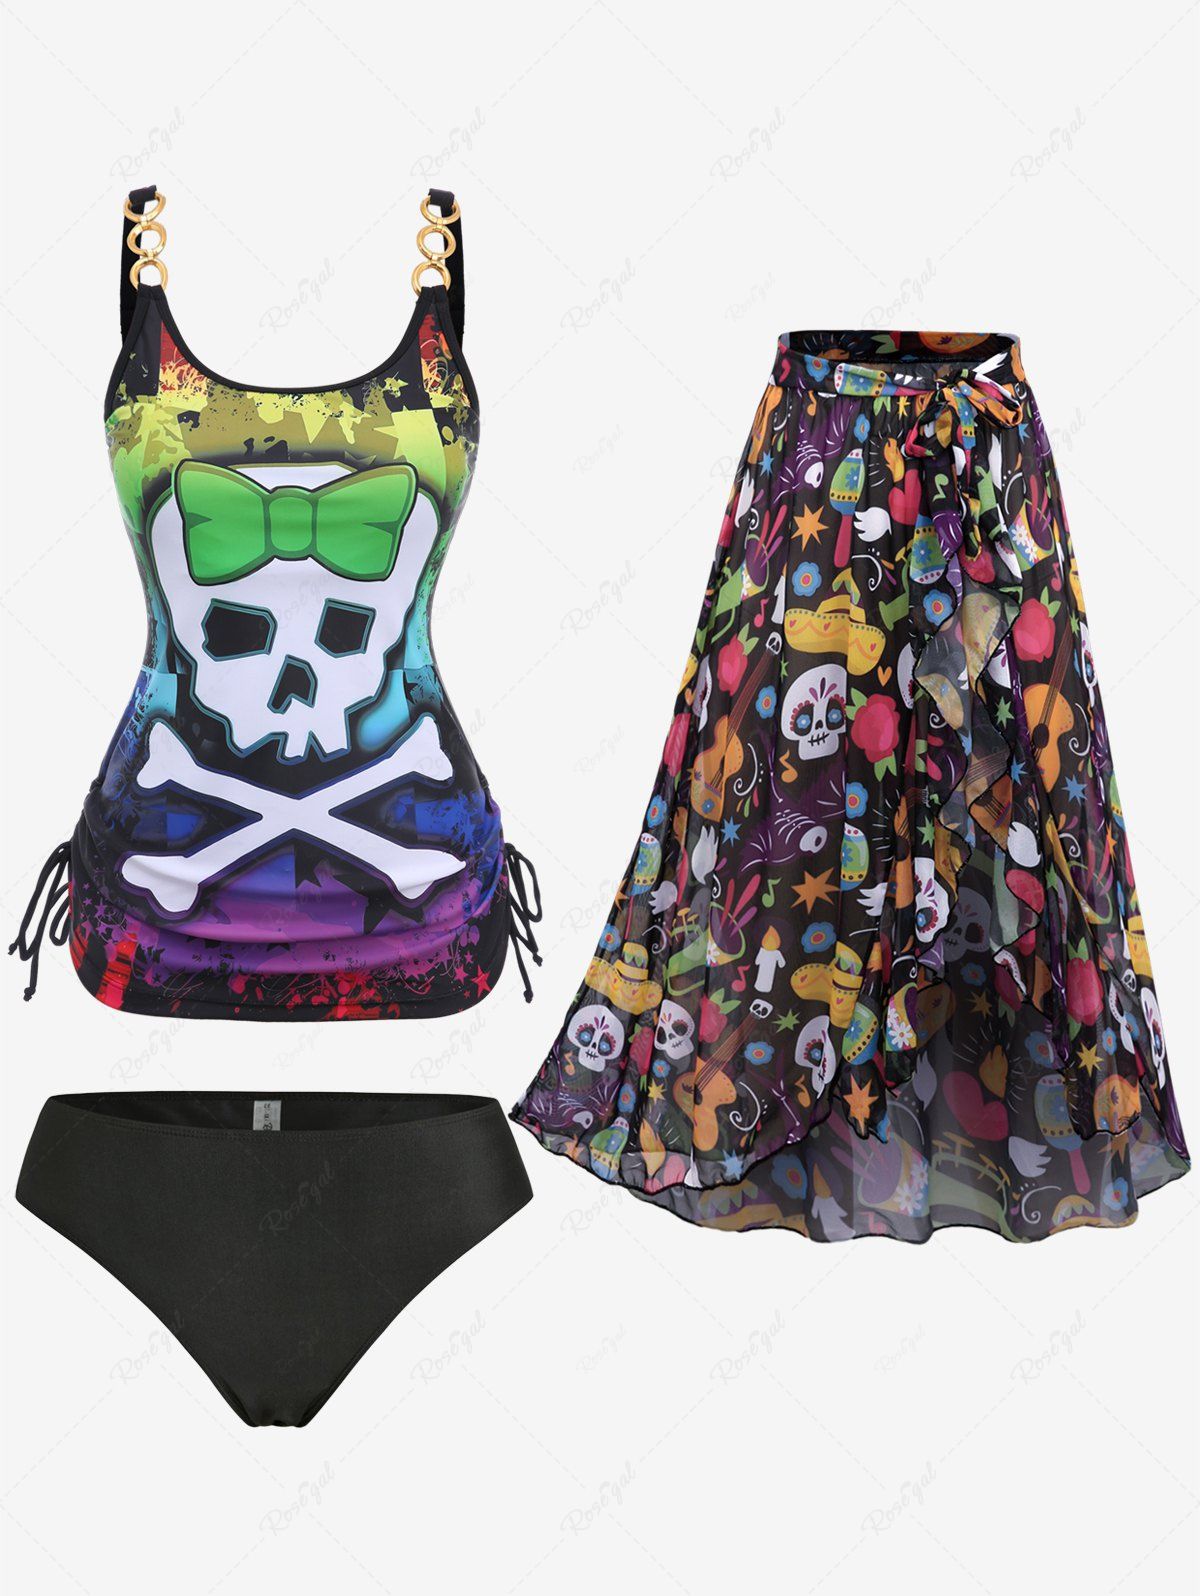 Shops Skull Bowknot Colorblock Painting Splatter Print Cinched Top and Bottom Tankini Set and Floral Mesh Wrap Flounce Asymmetric Sarong Three Piece Swimsuit  